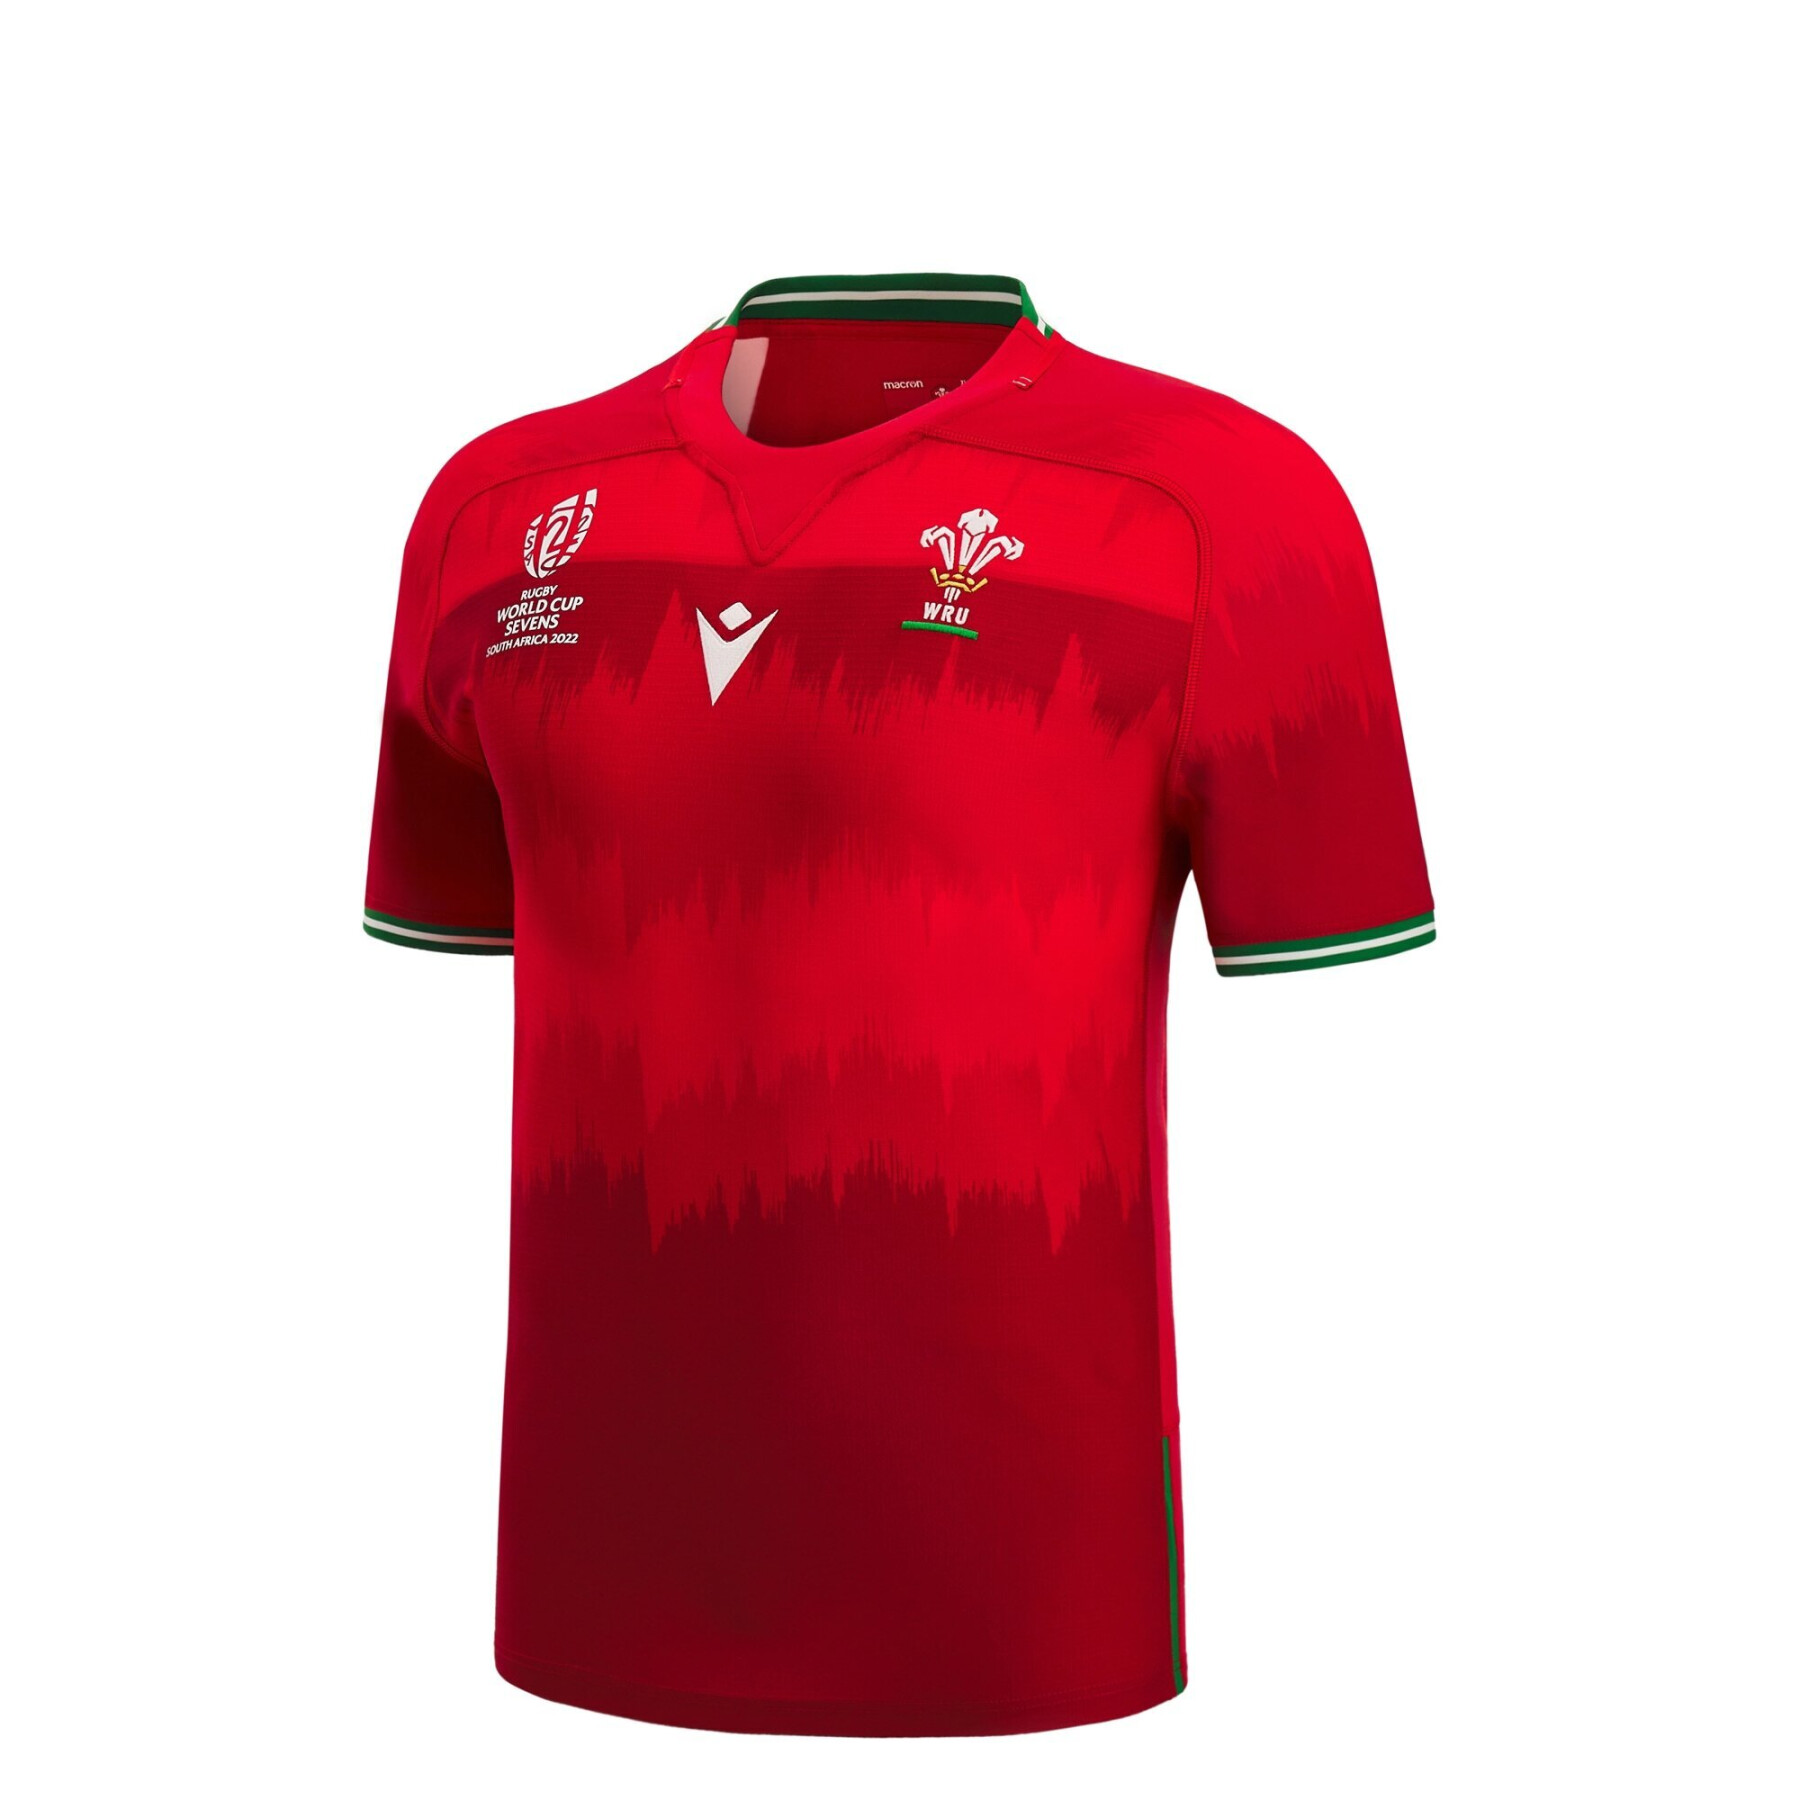 Children's home jersey Pays de Galles Rugby XV 7S RWC 2023